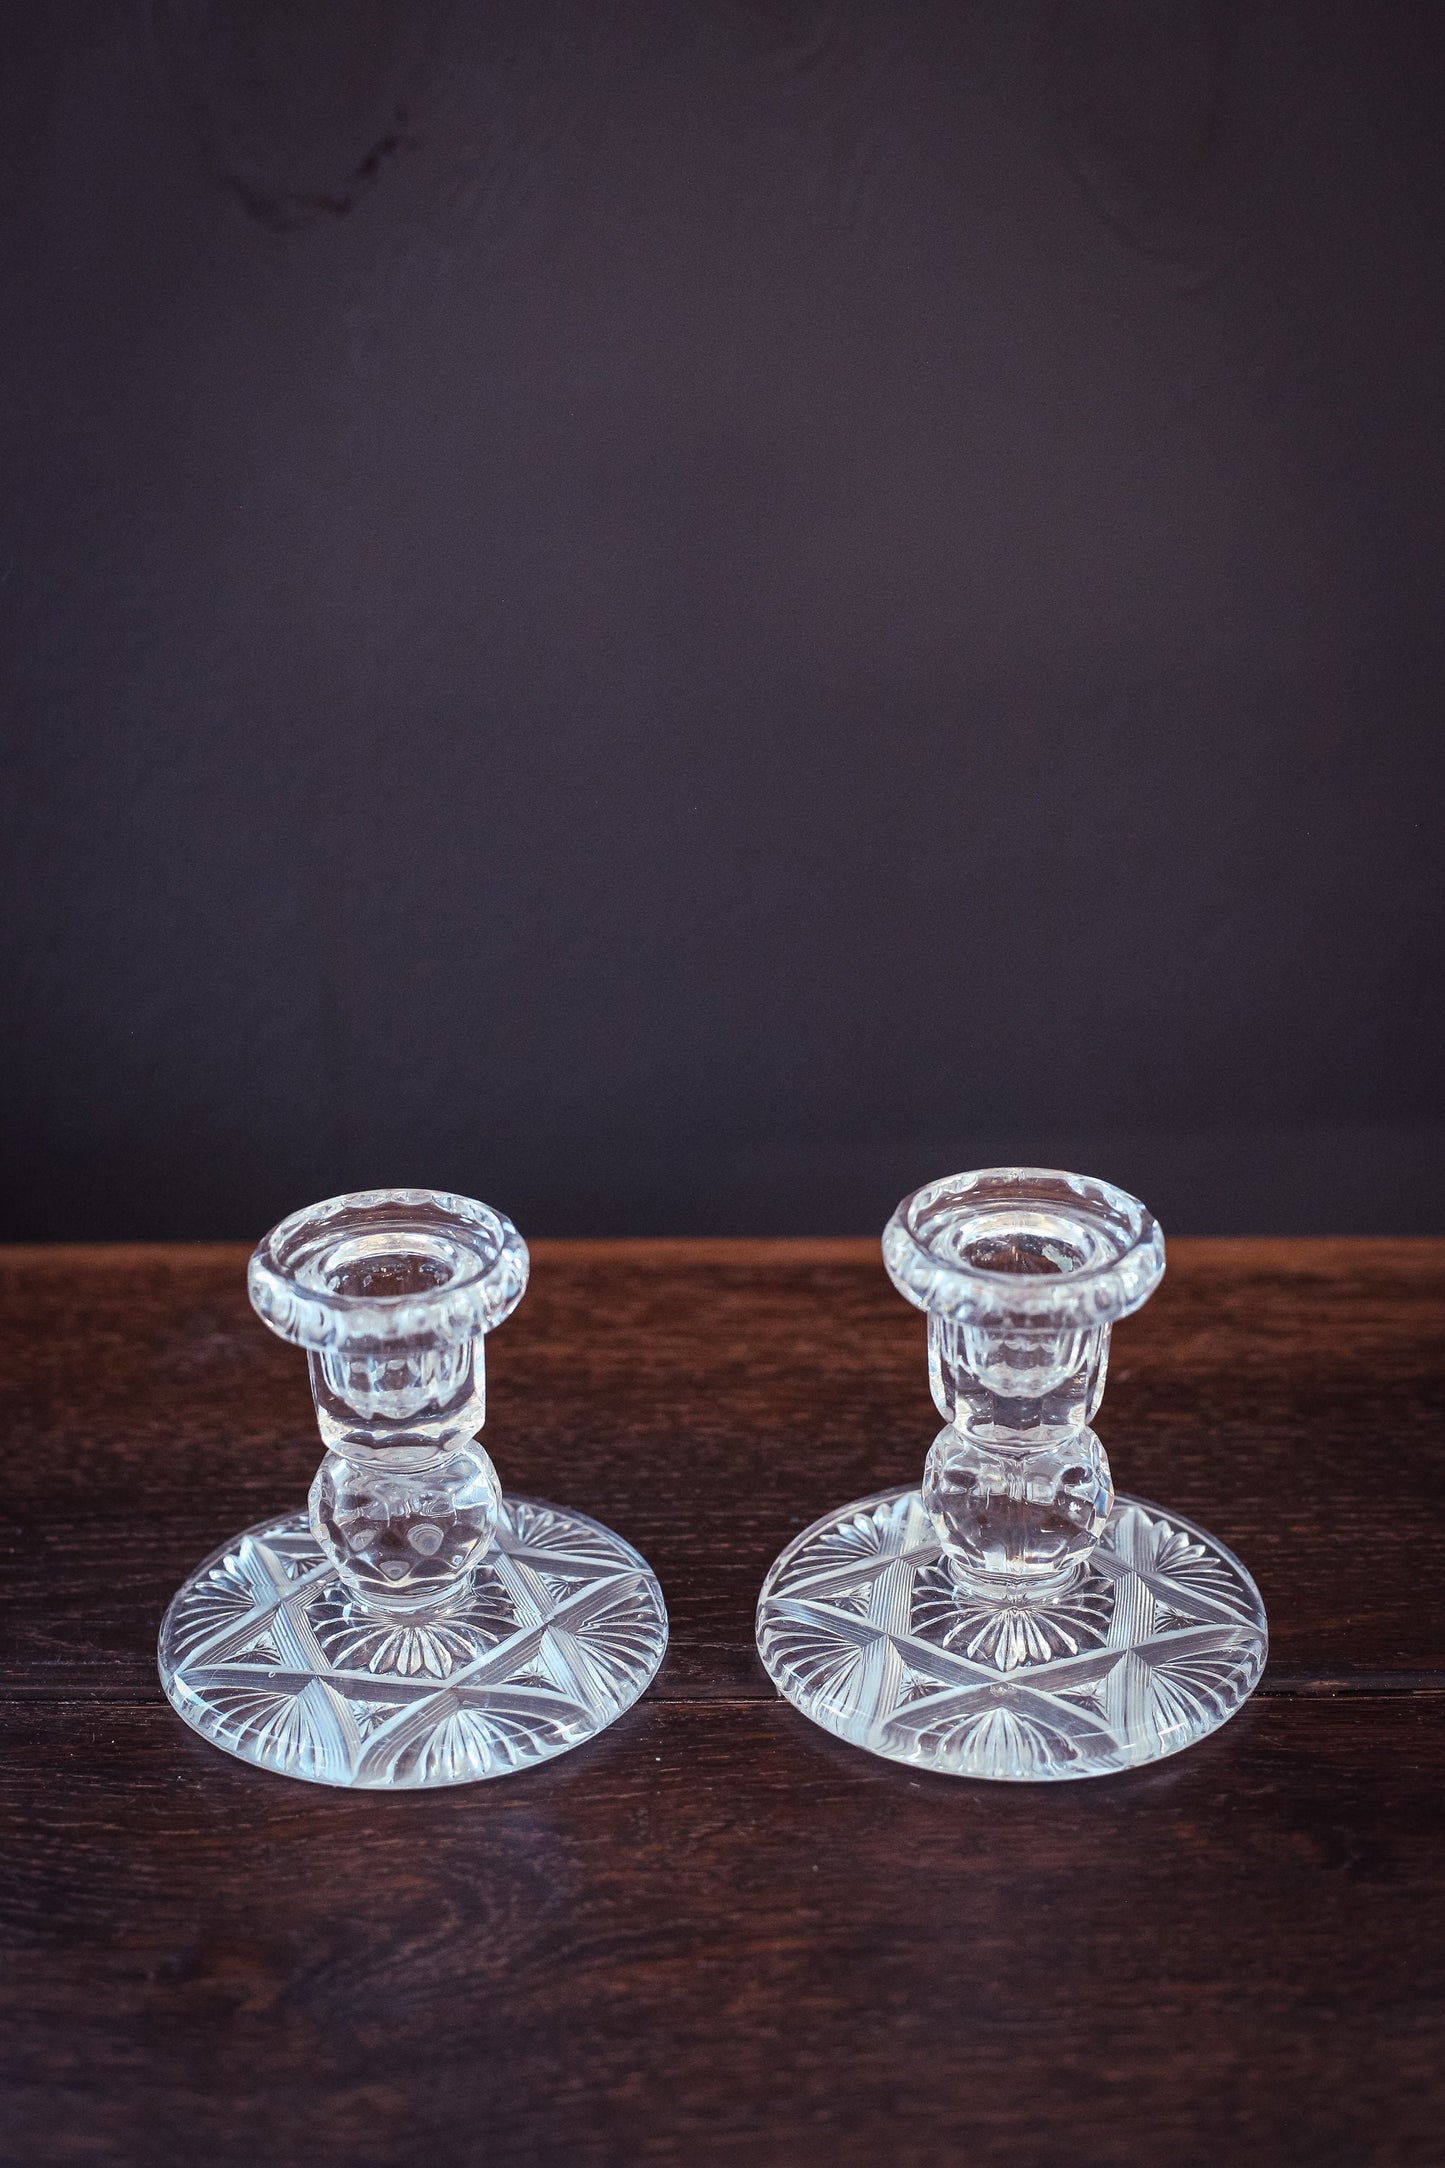 Pair of Crystal Carved Candle Holders - Set of 2 Vintage Cut Glass Candle Bases